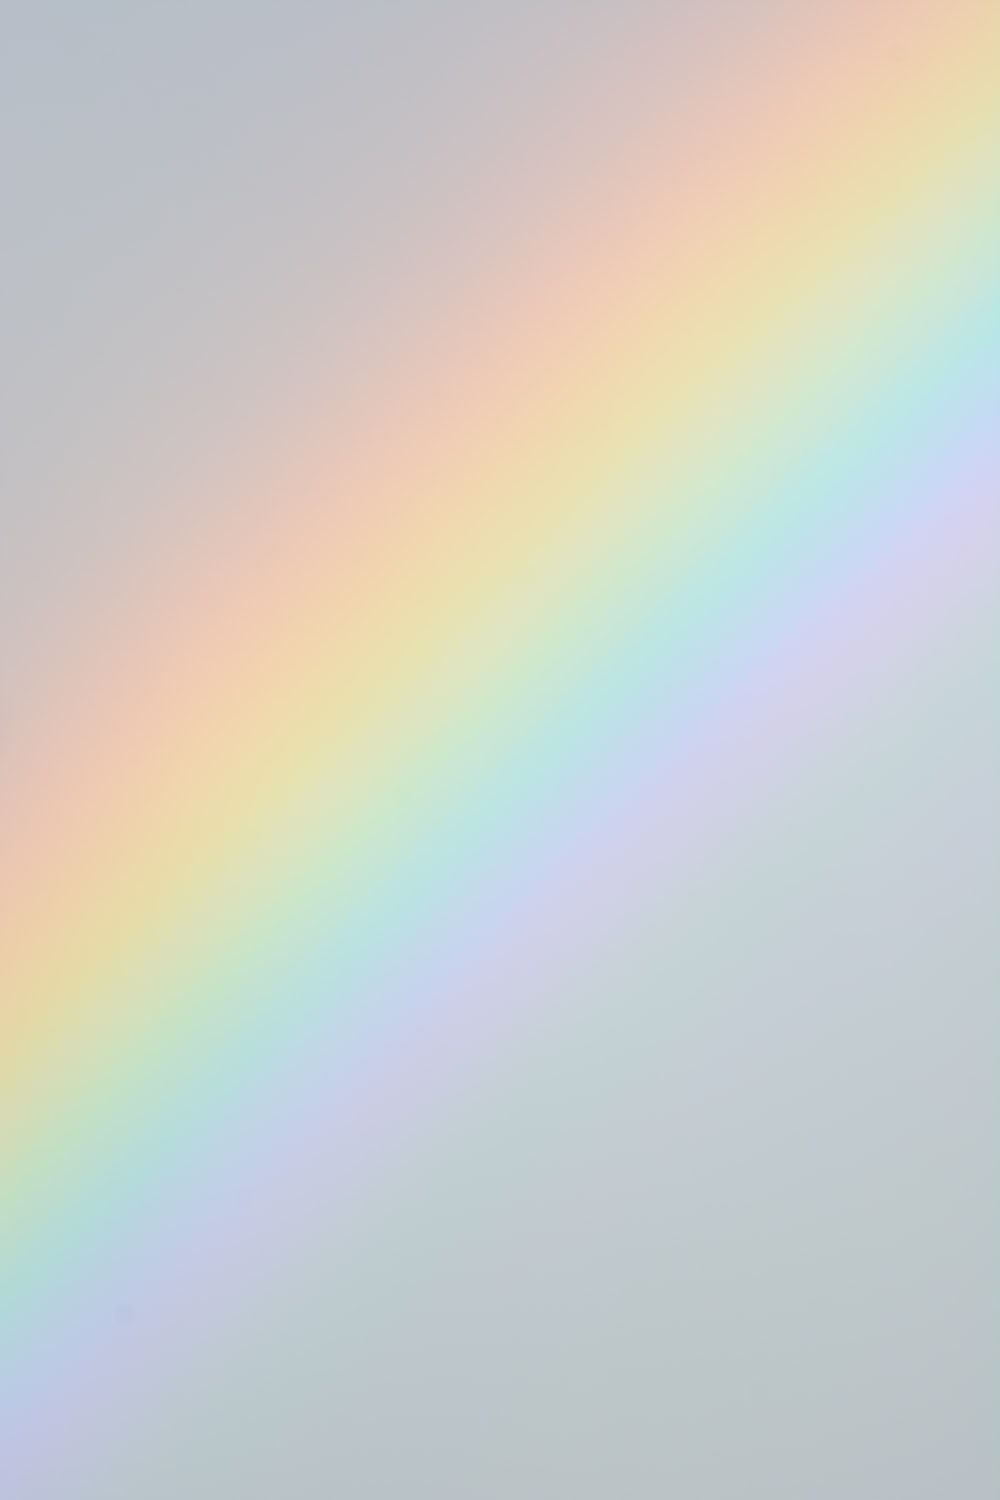 Pastel Rainbow Picture. Download Free Image